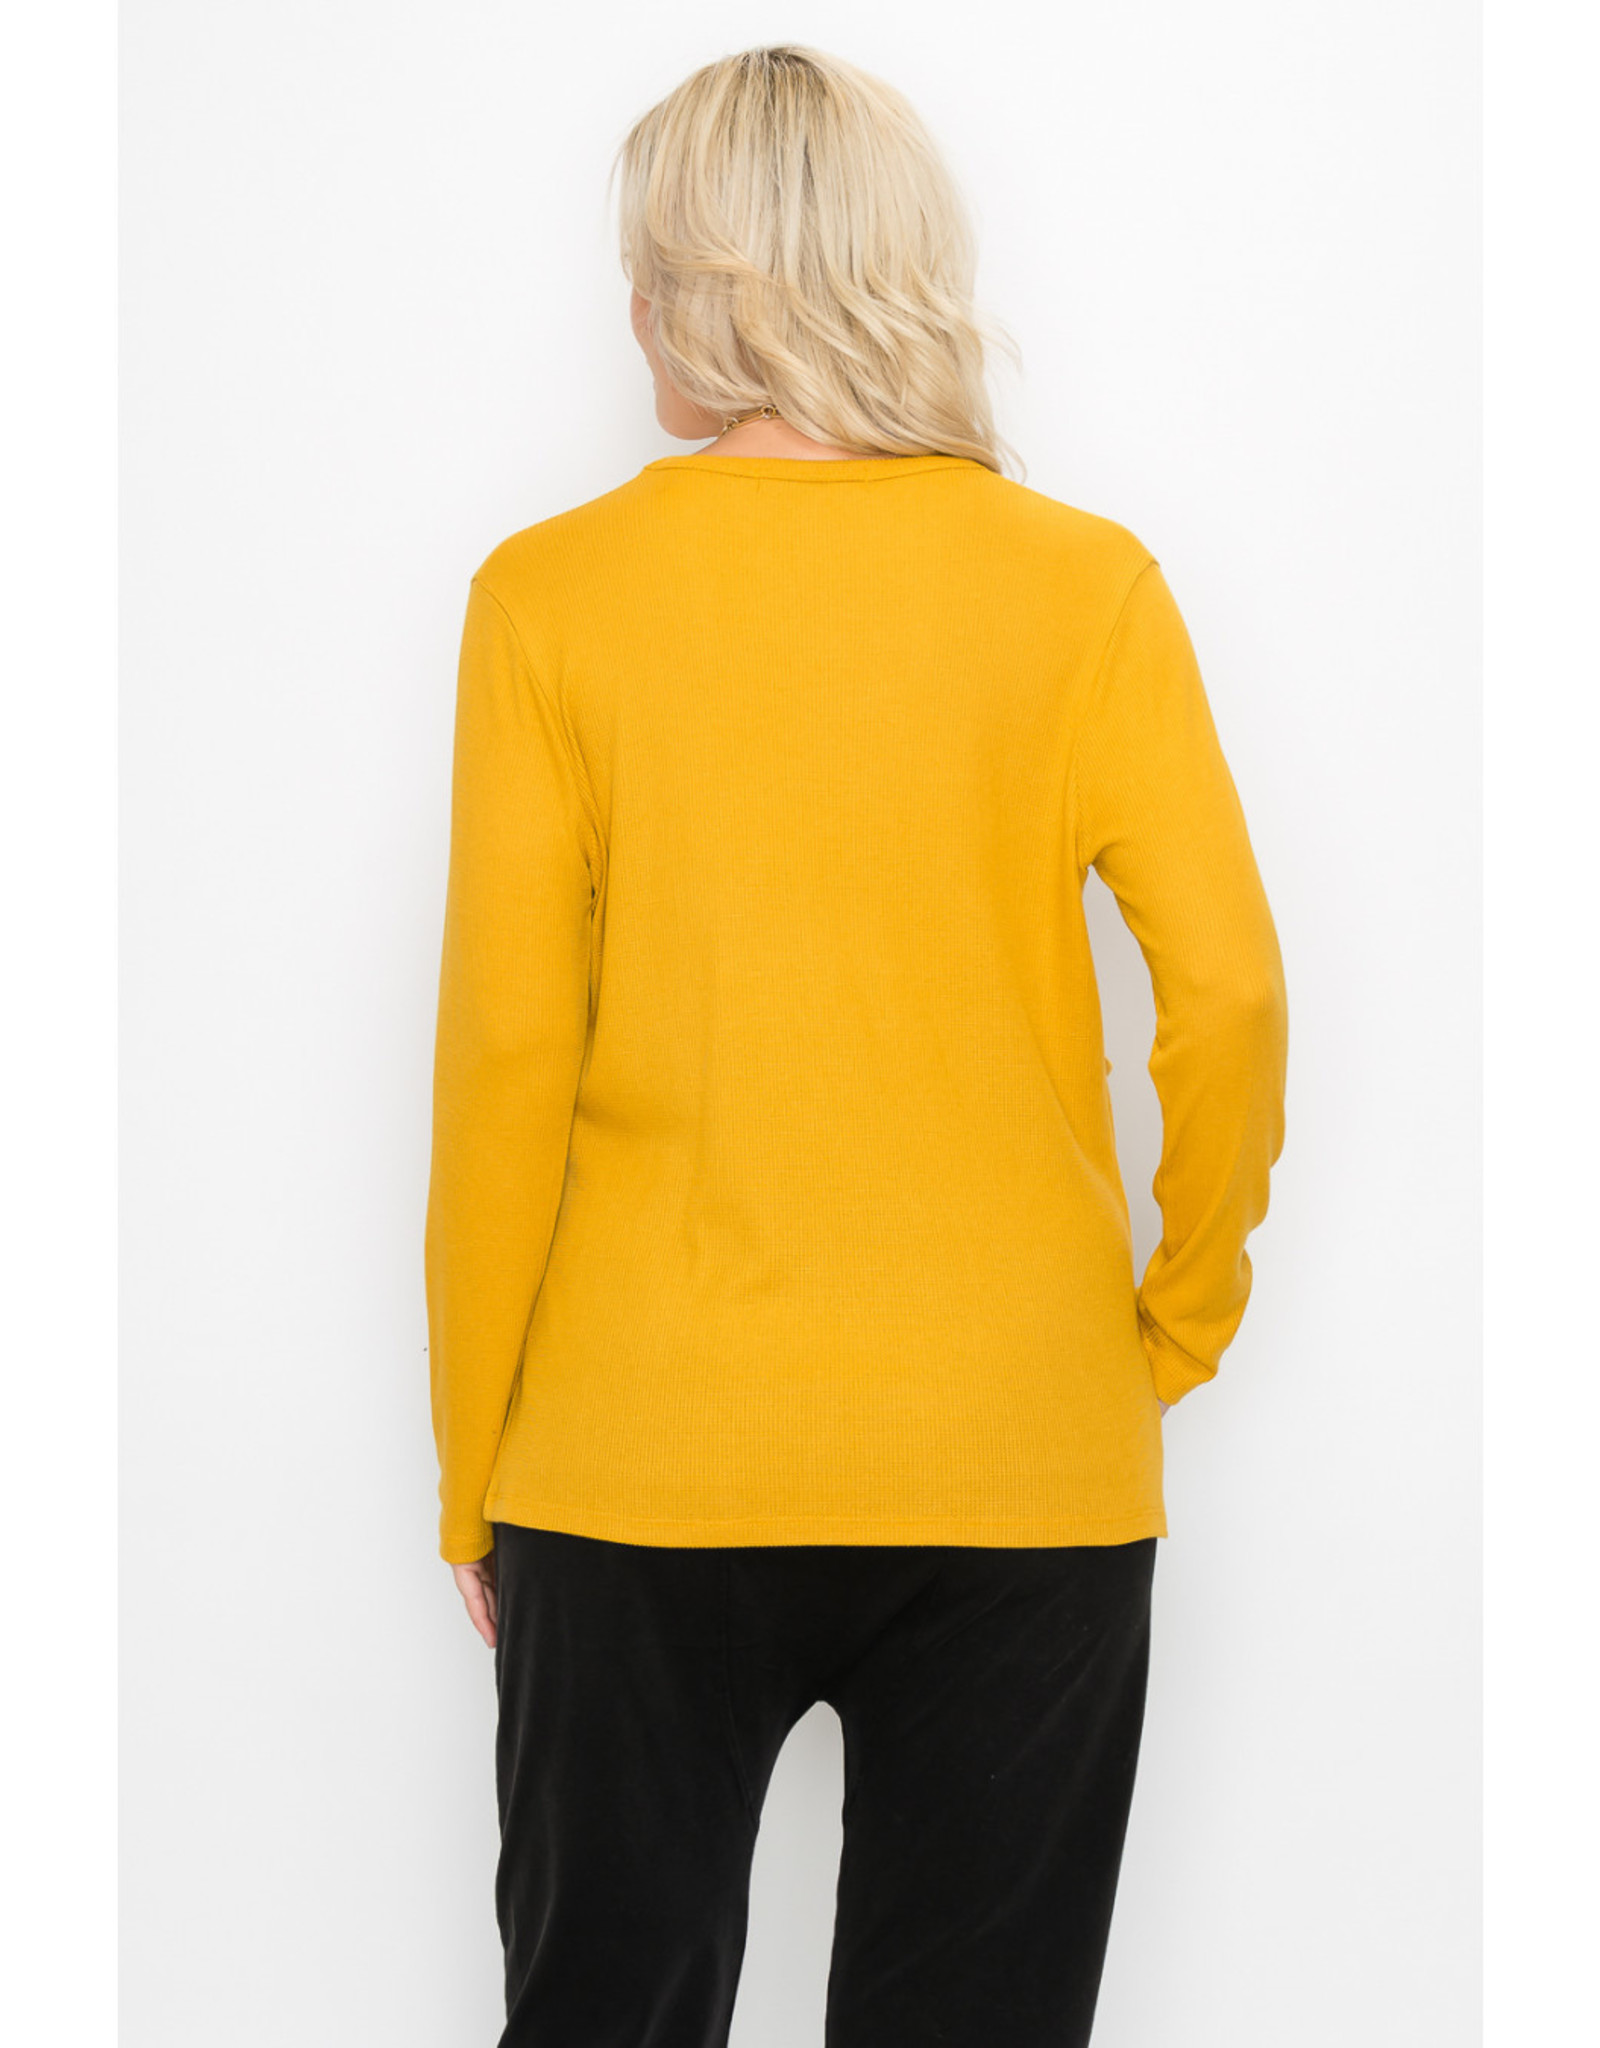 Coin1804 Front Pocket Long Sleeve Top